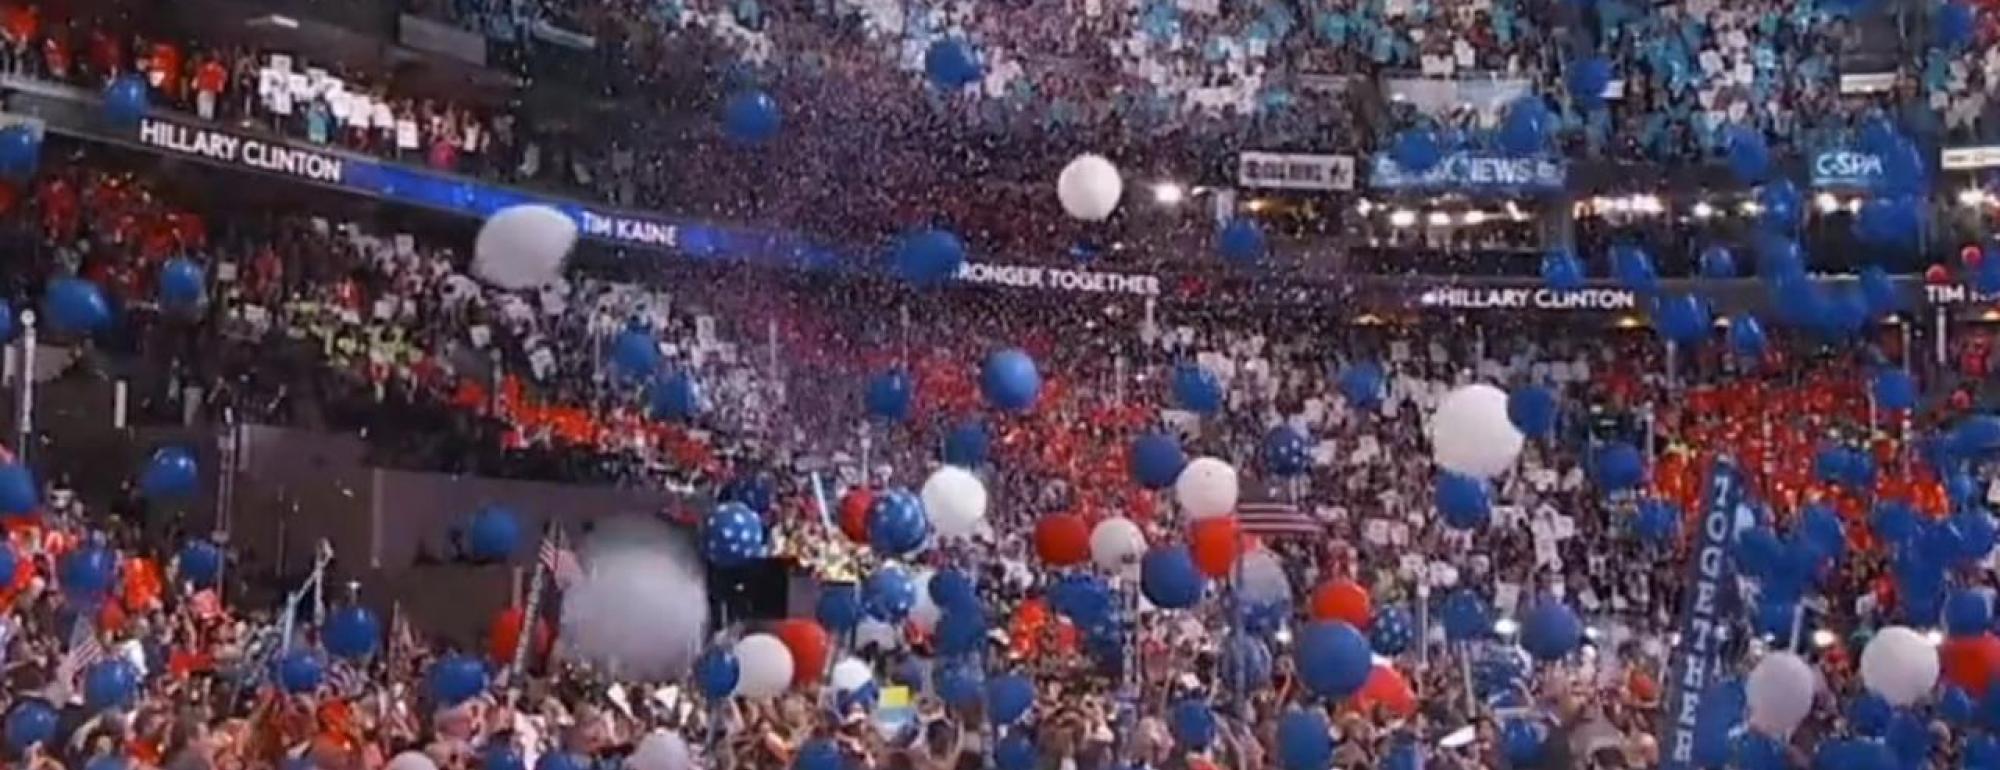 balloons drop from the ceiling of a democratic convention